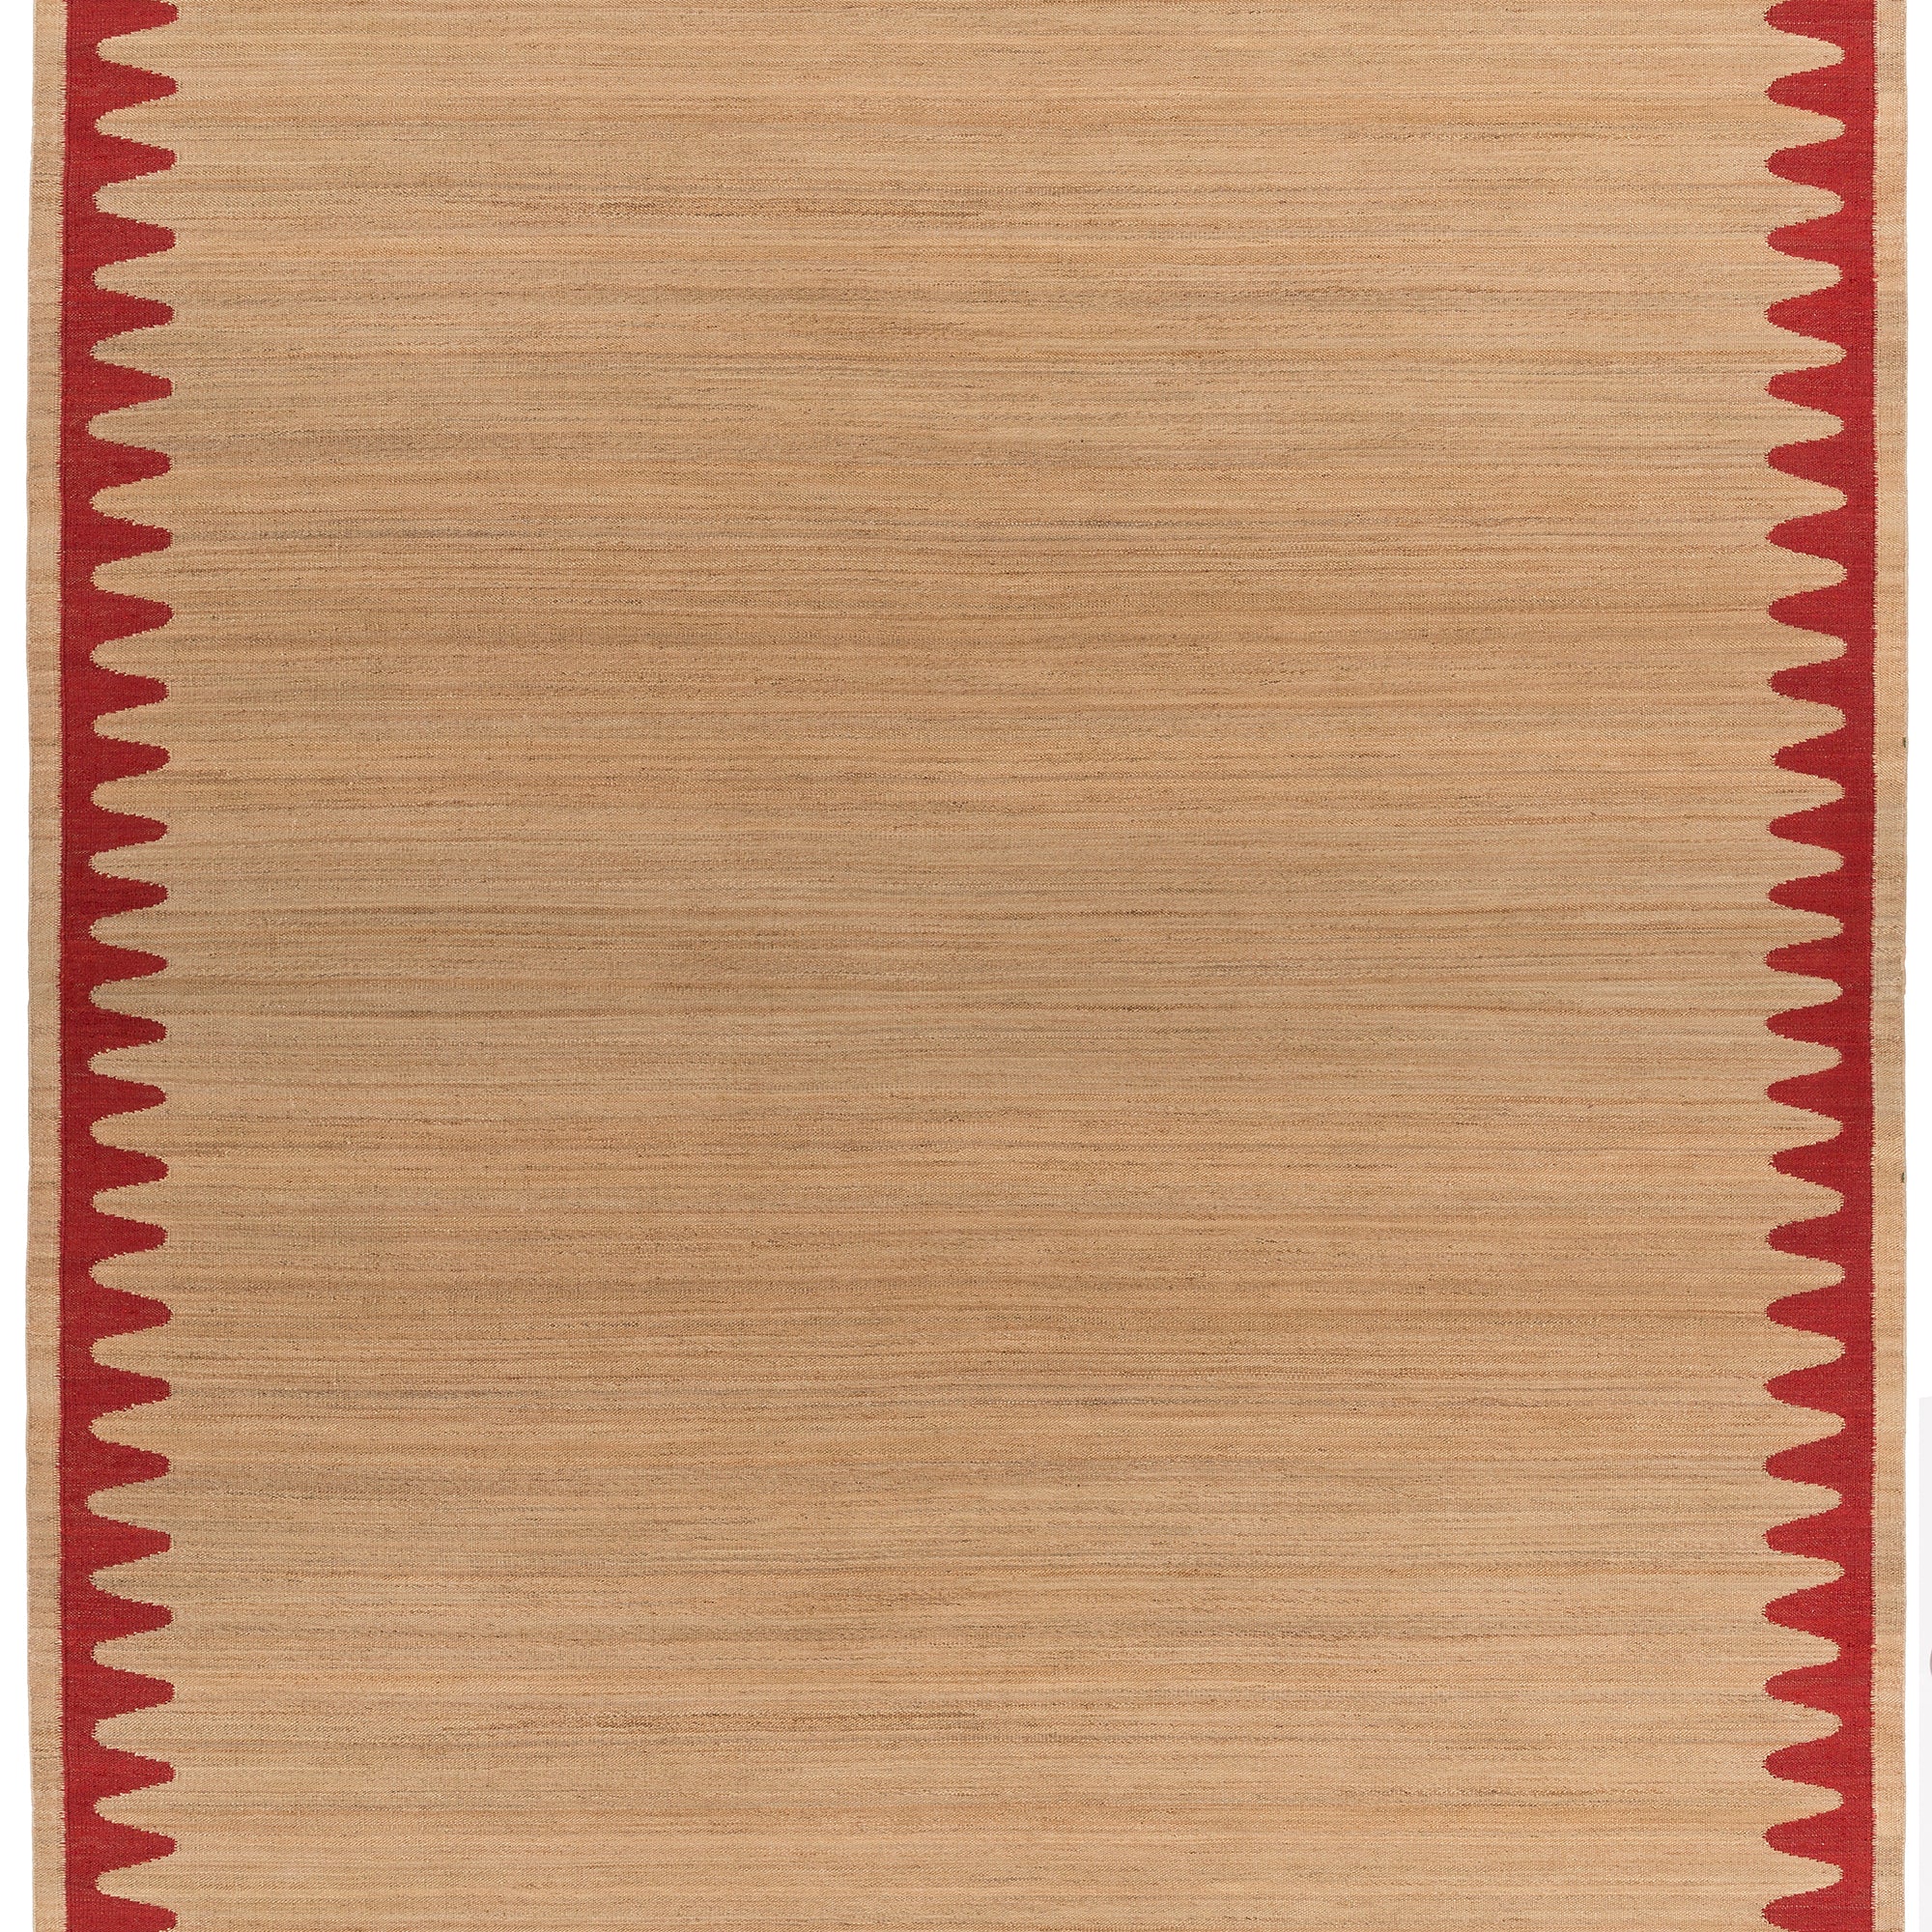 Waver Rug in Safflower Red, a strated ecru field with a red flame stitch border. 